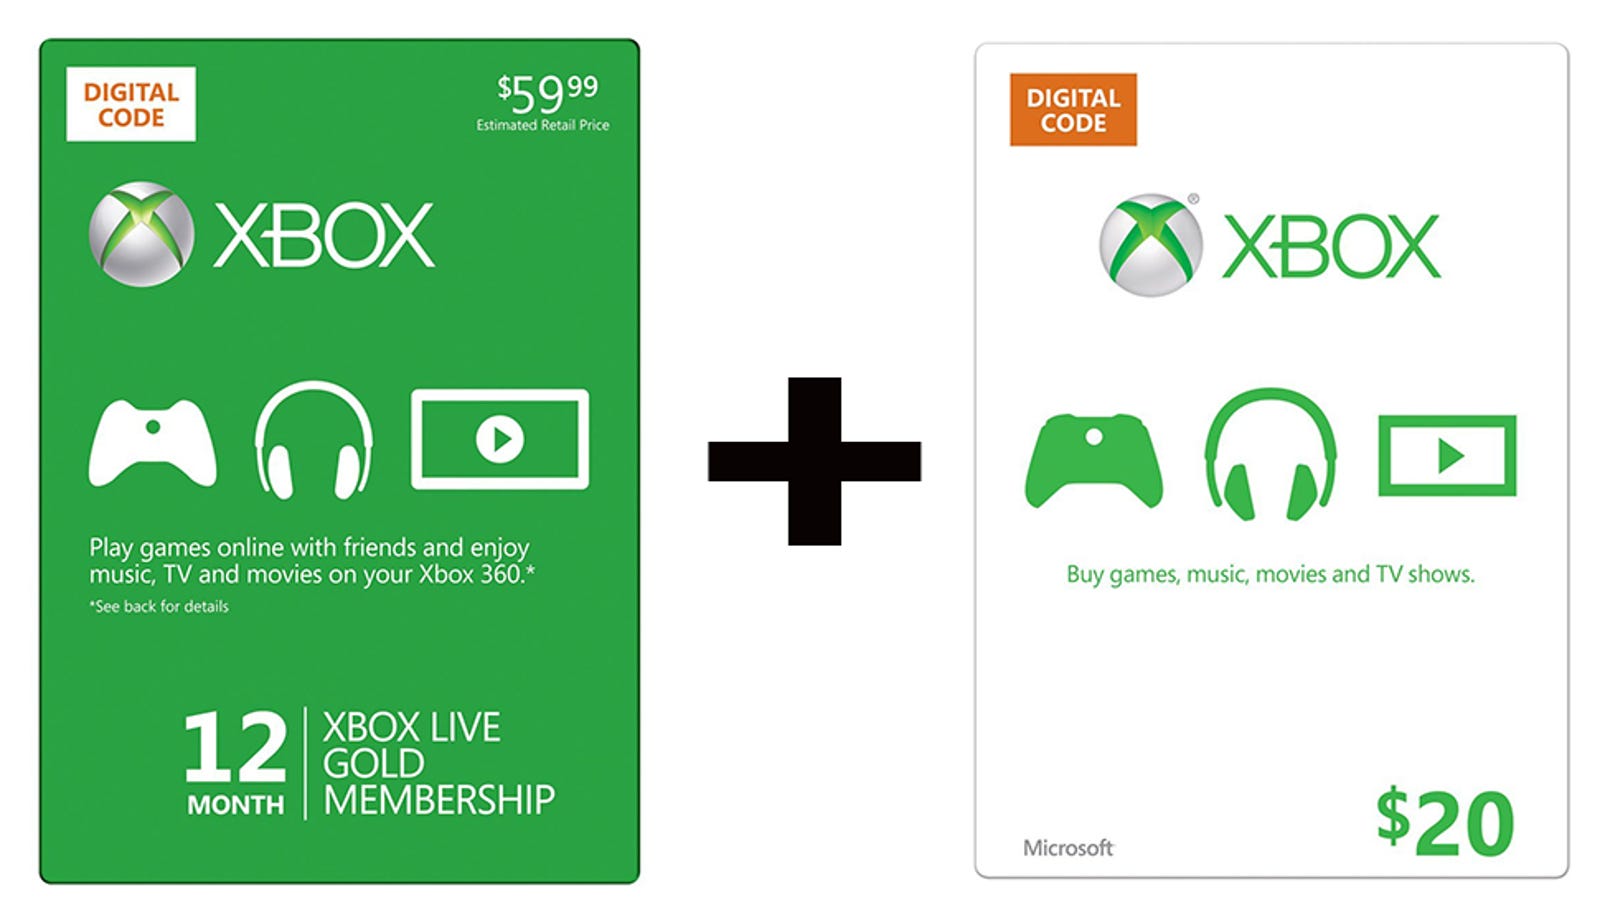 Buy A Year Of LIVE Gold, Get A 20 Xbox Gift Card